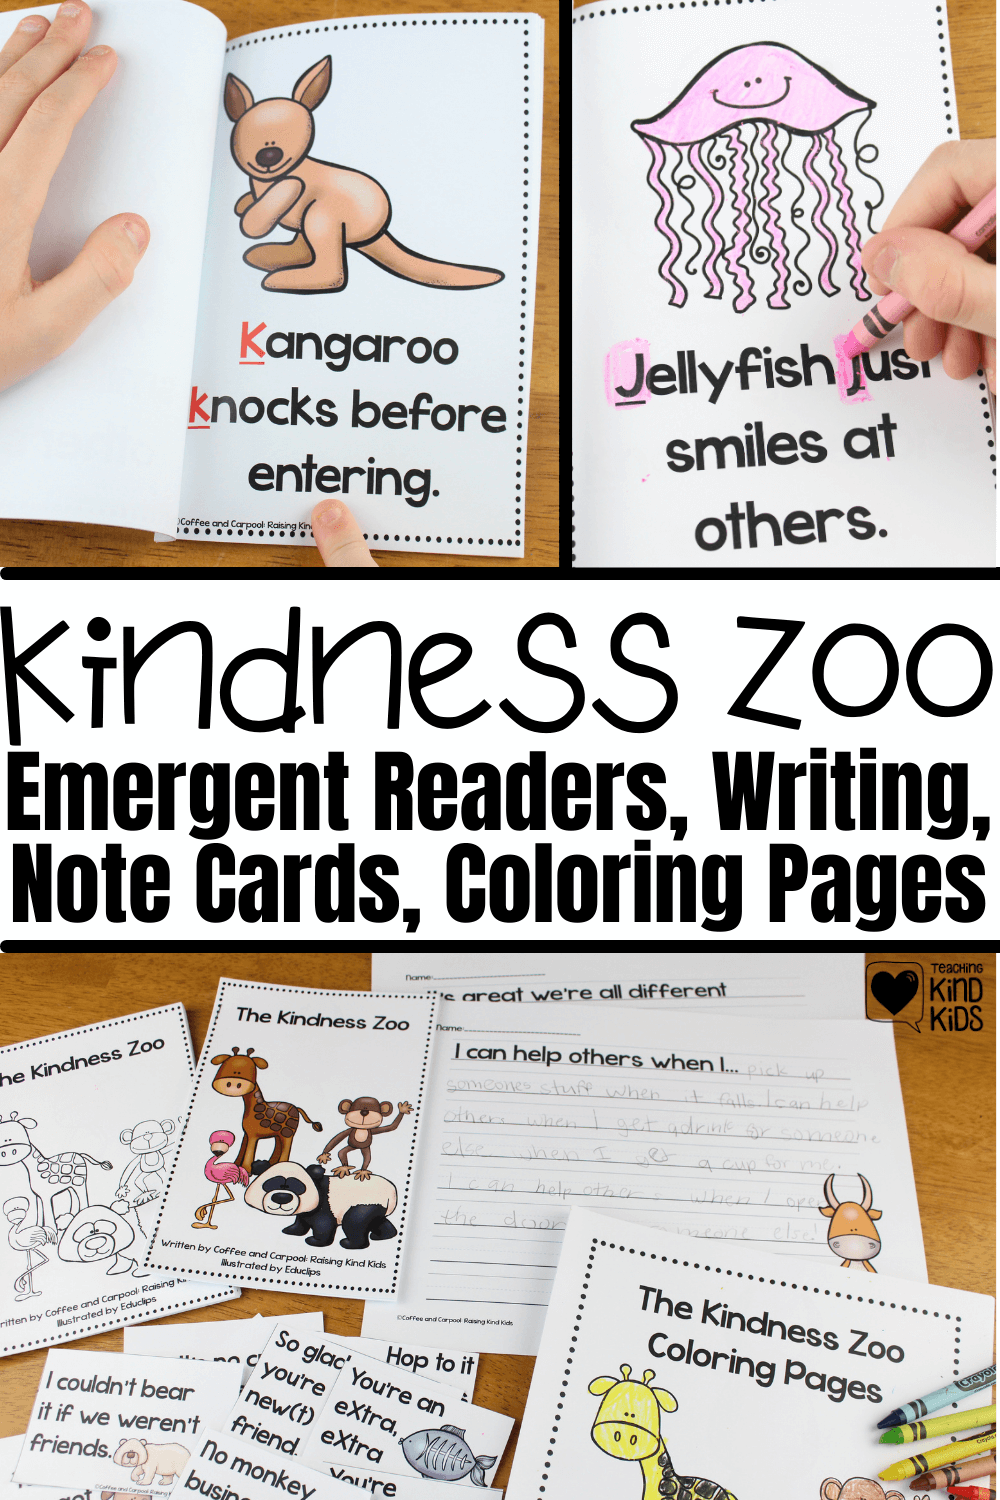 Use this Kindenss Zoo to teach sel curriculum and 26 ways to speak and act with kindness. It's a great addition to an animal unit or letter of the week activities since each page focuses on a different letter of the alpahbet and a different zoo animal.